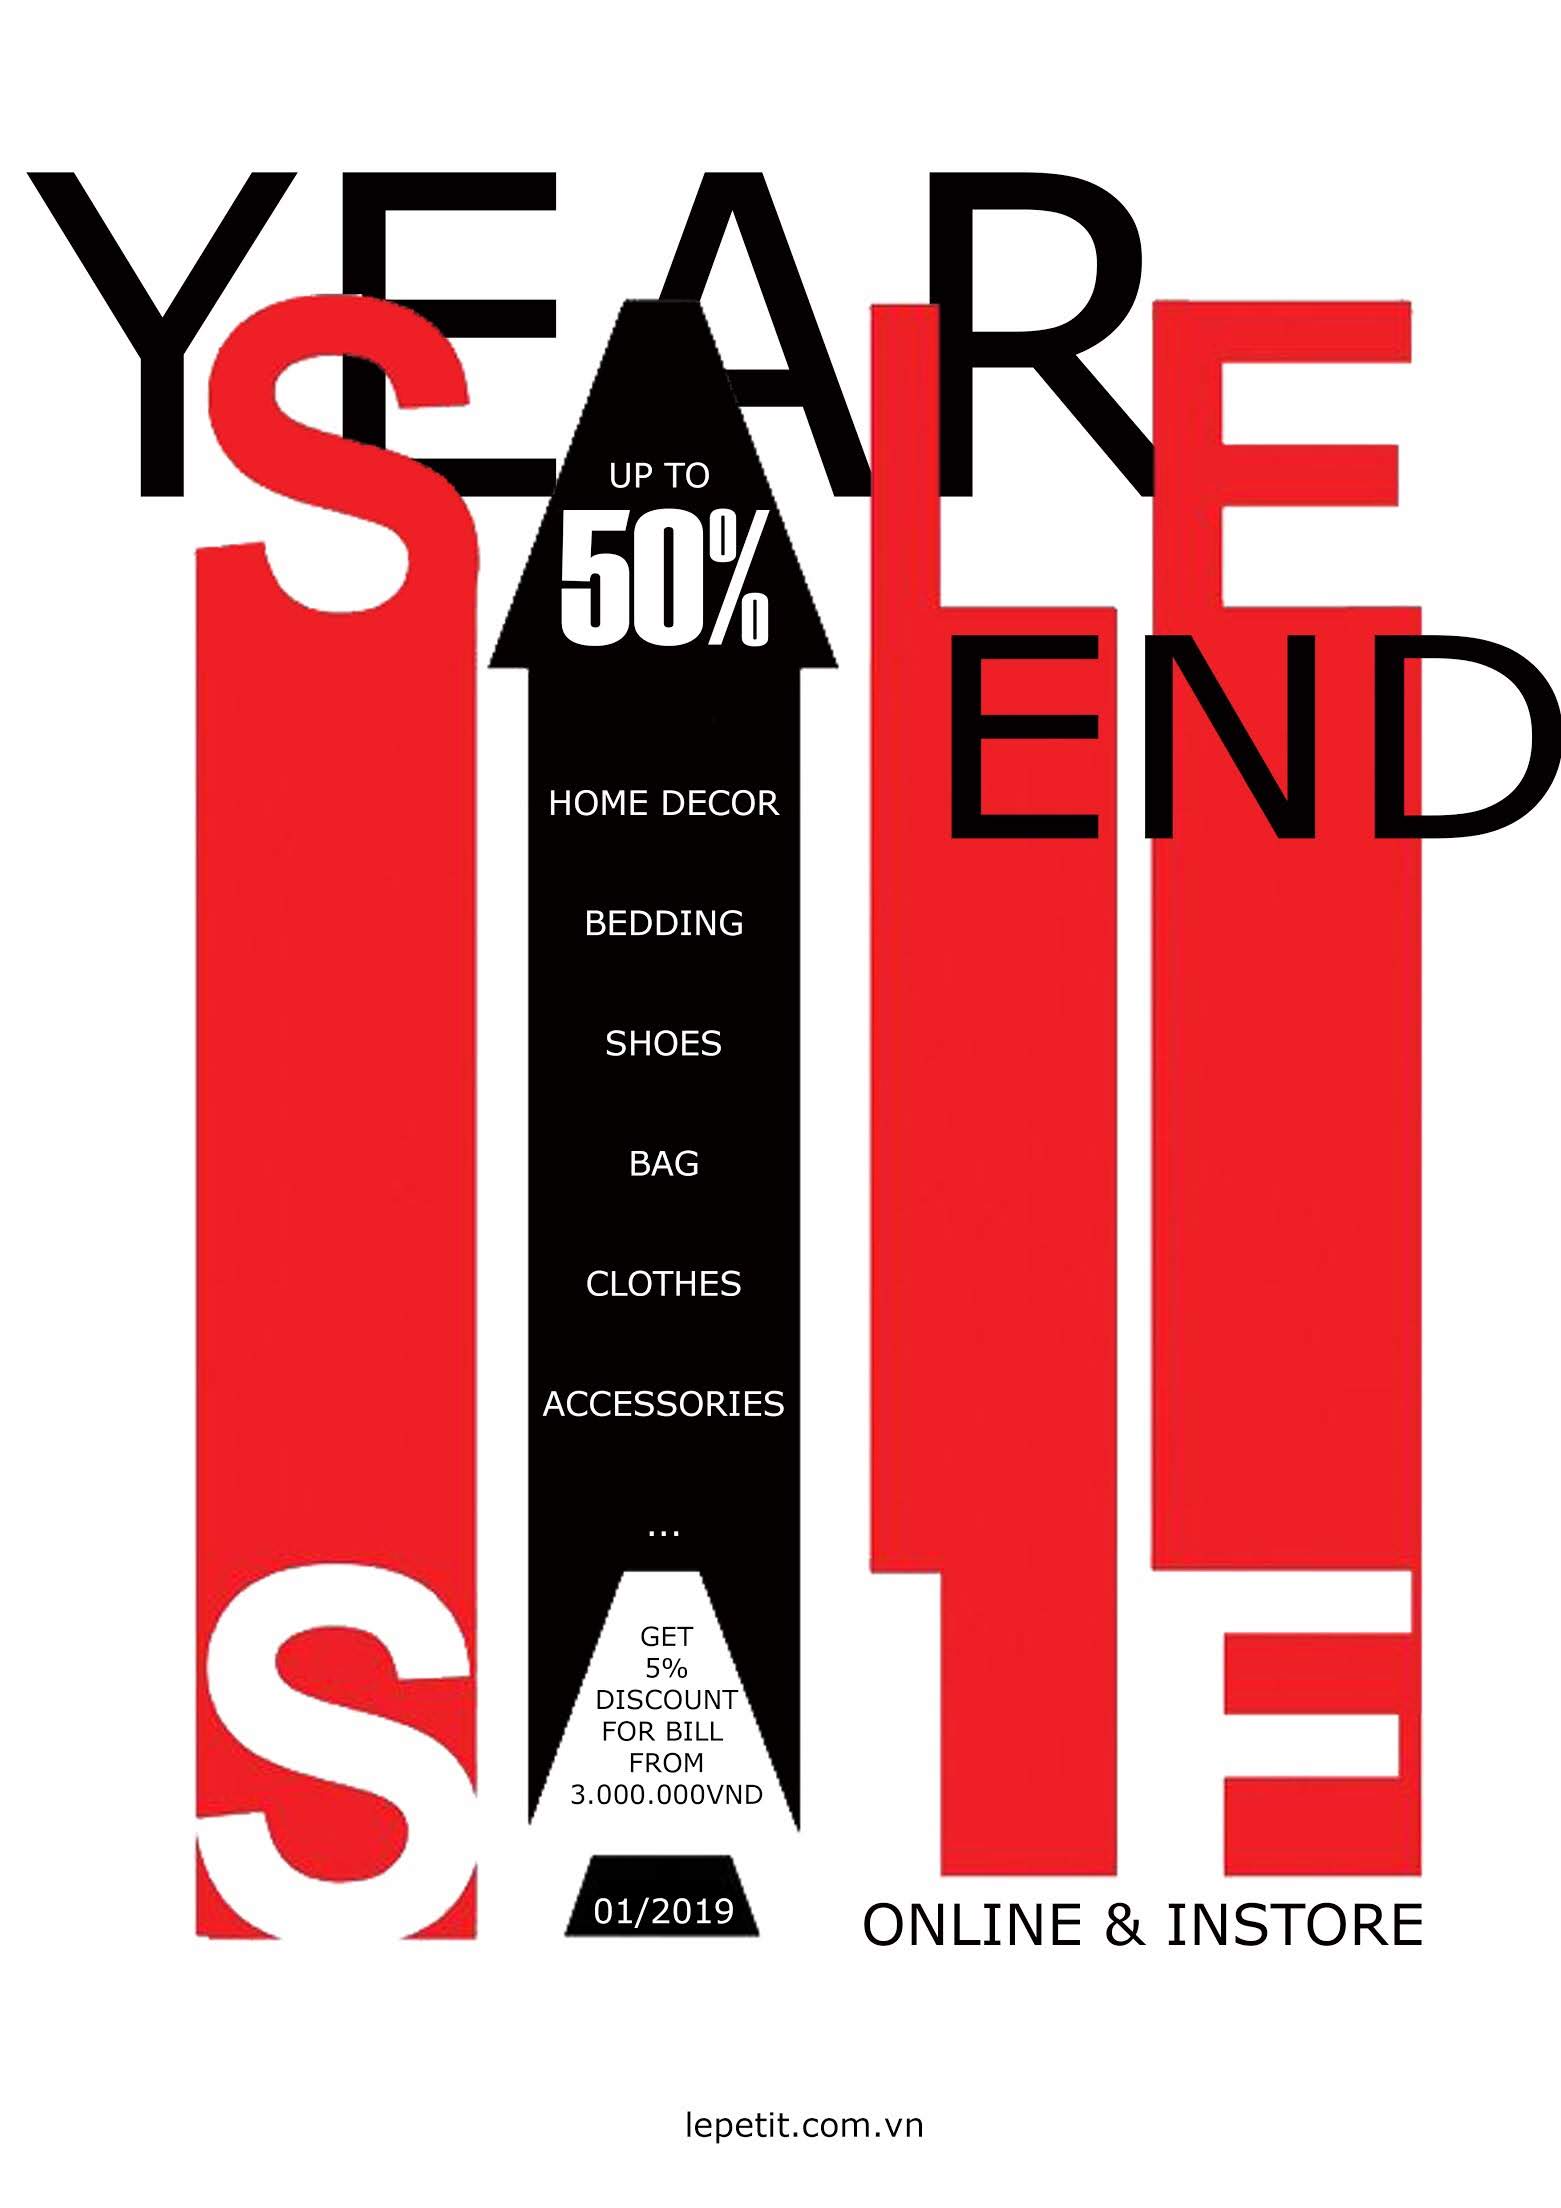 YEAR-END SALE 2018